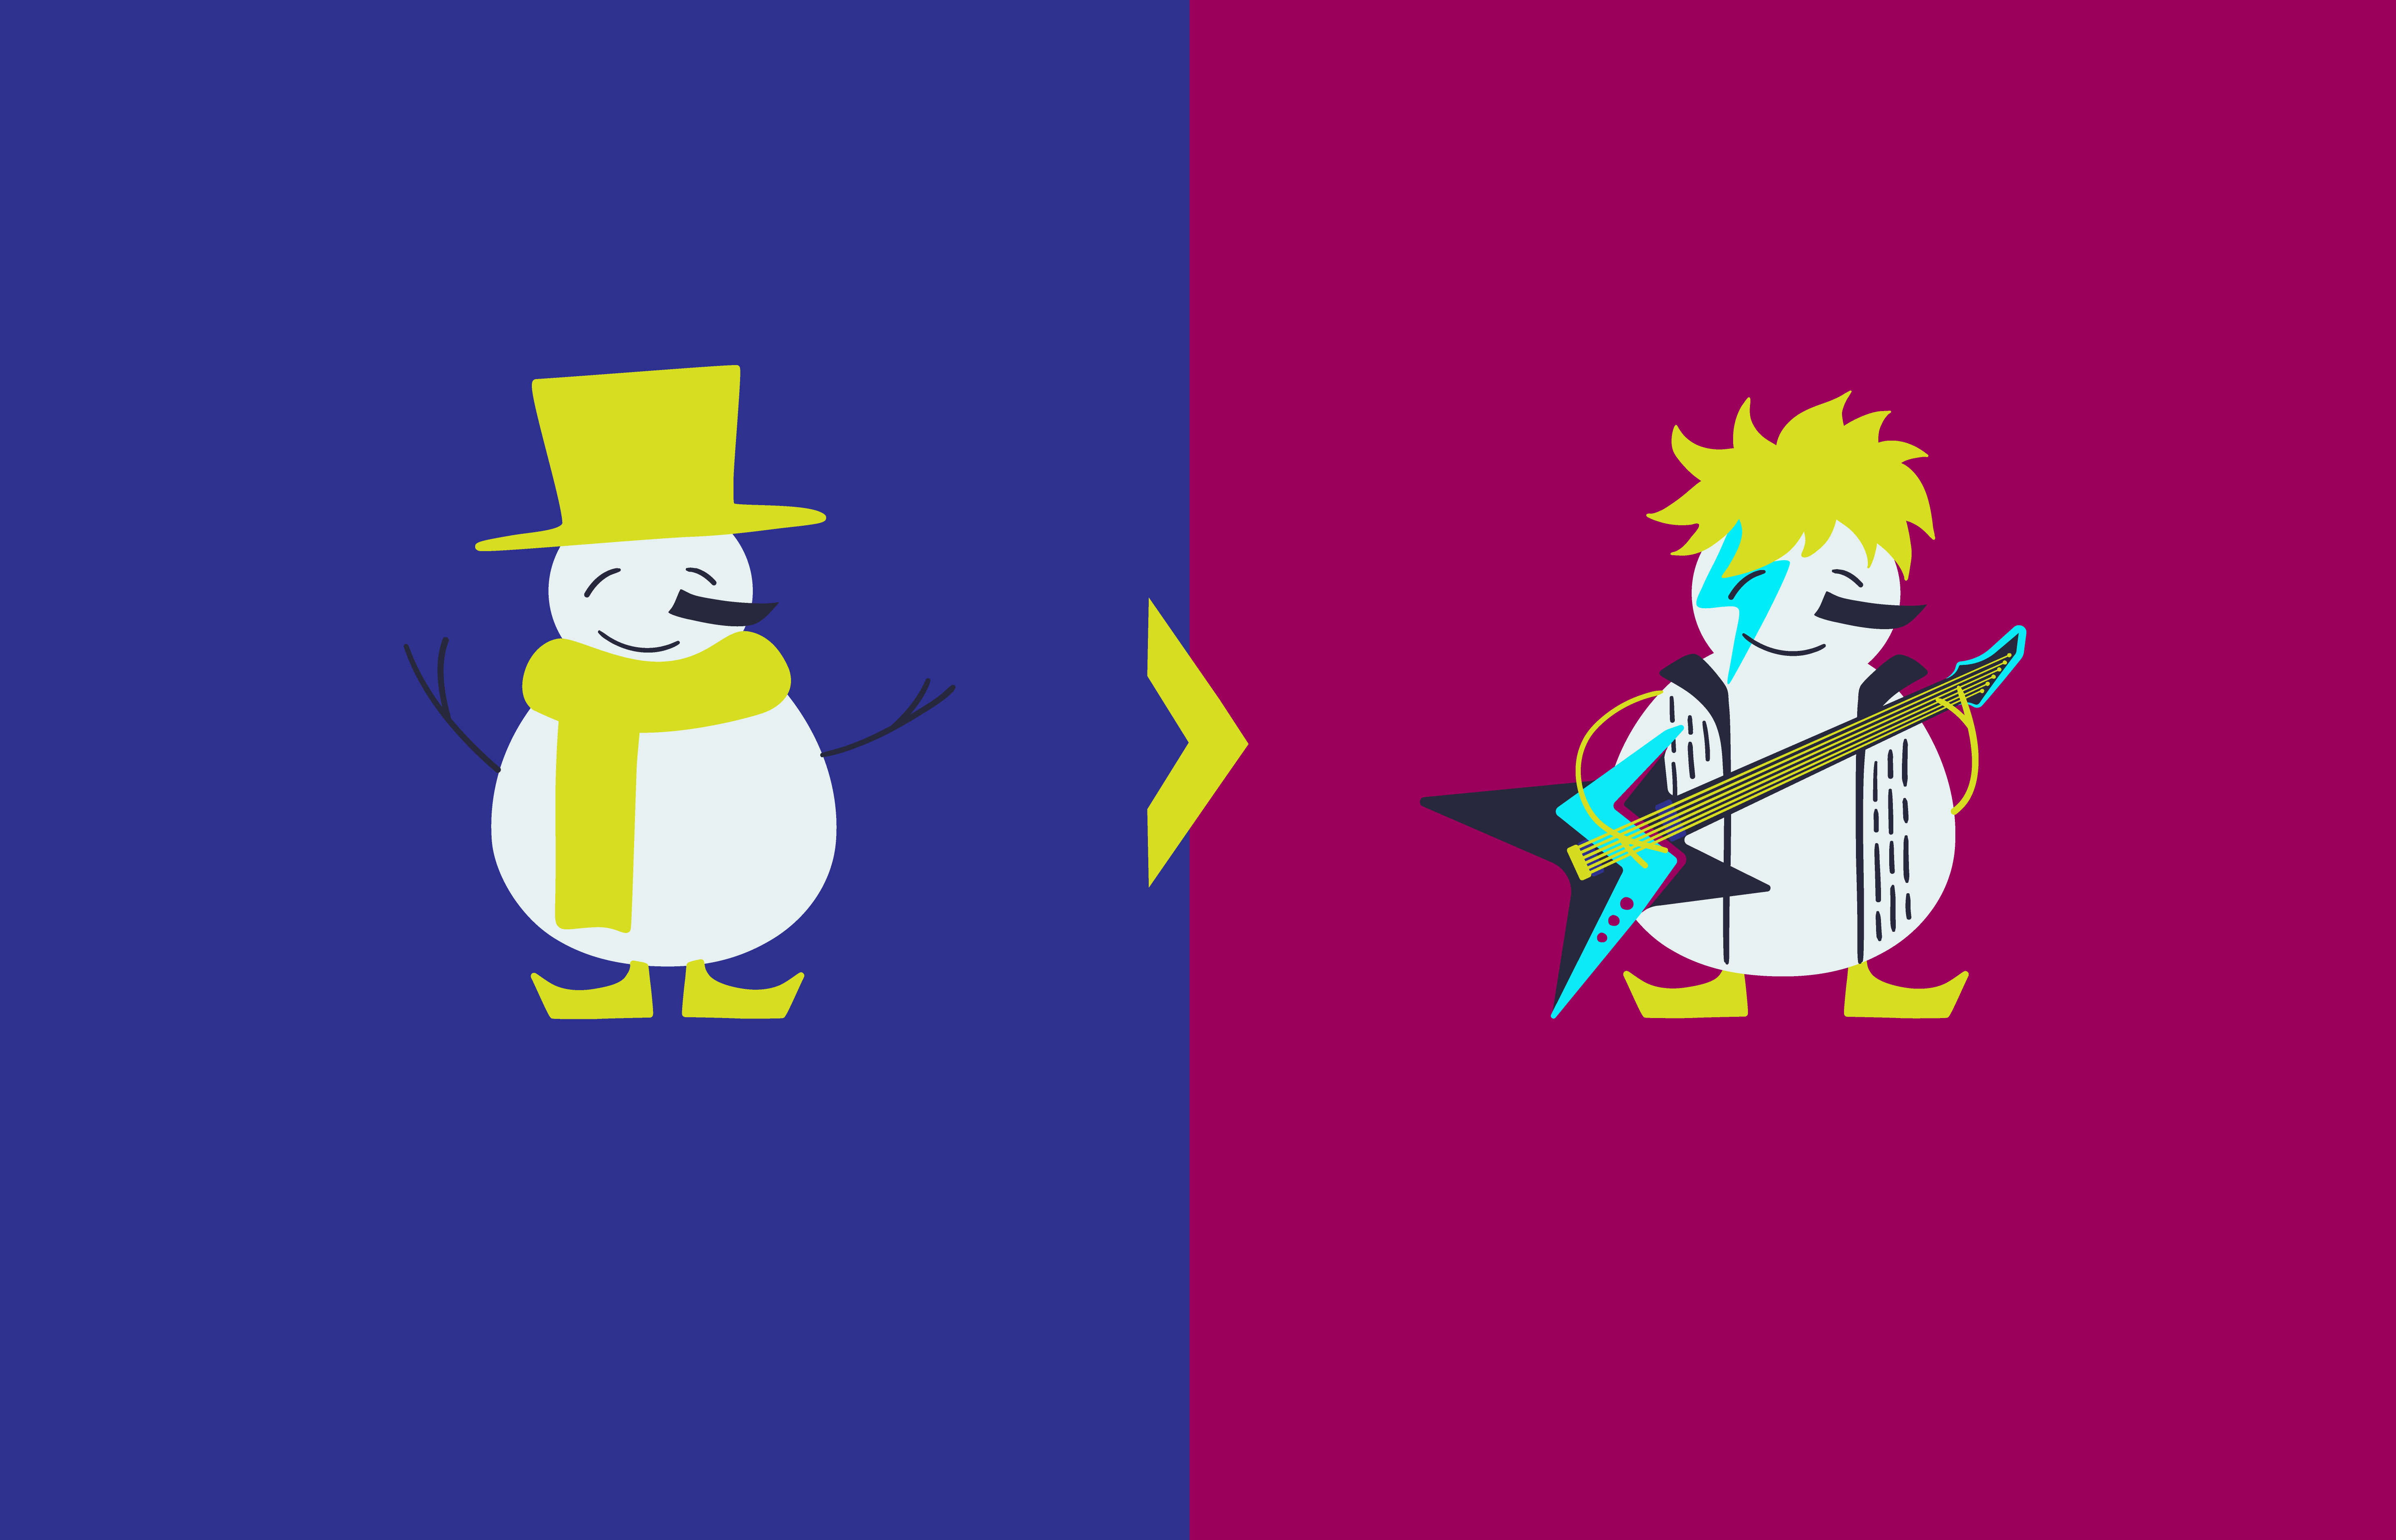 A before-and-after illustration of Frosty: a yellow top hat and scarf become messy yellow hair, bright blue lightning bolt makeup, a white jacket, and an electric guitar